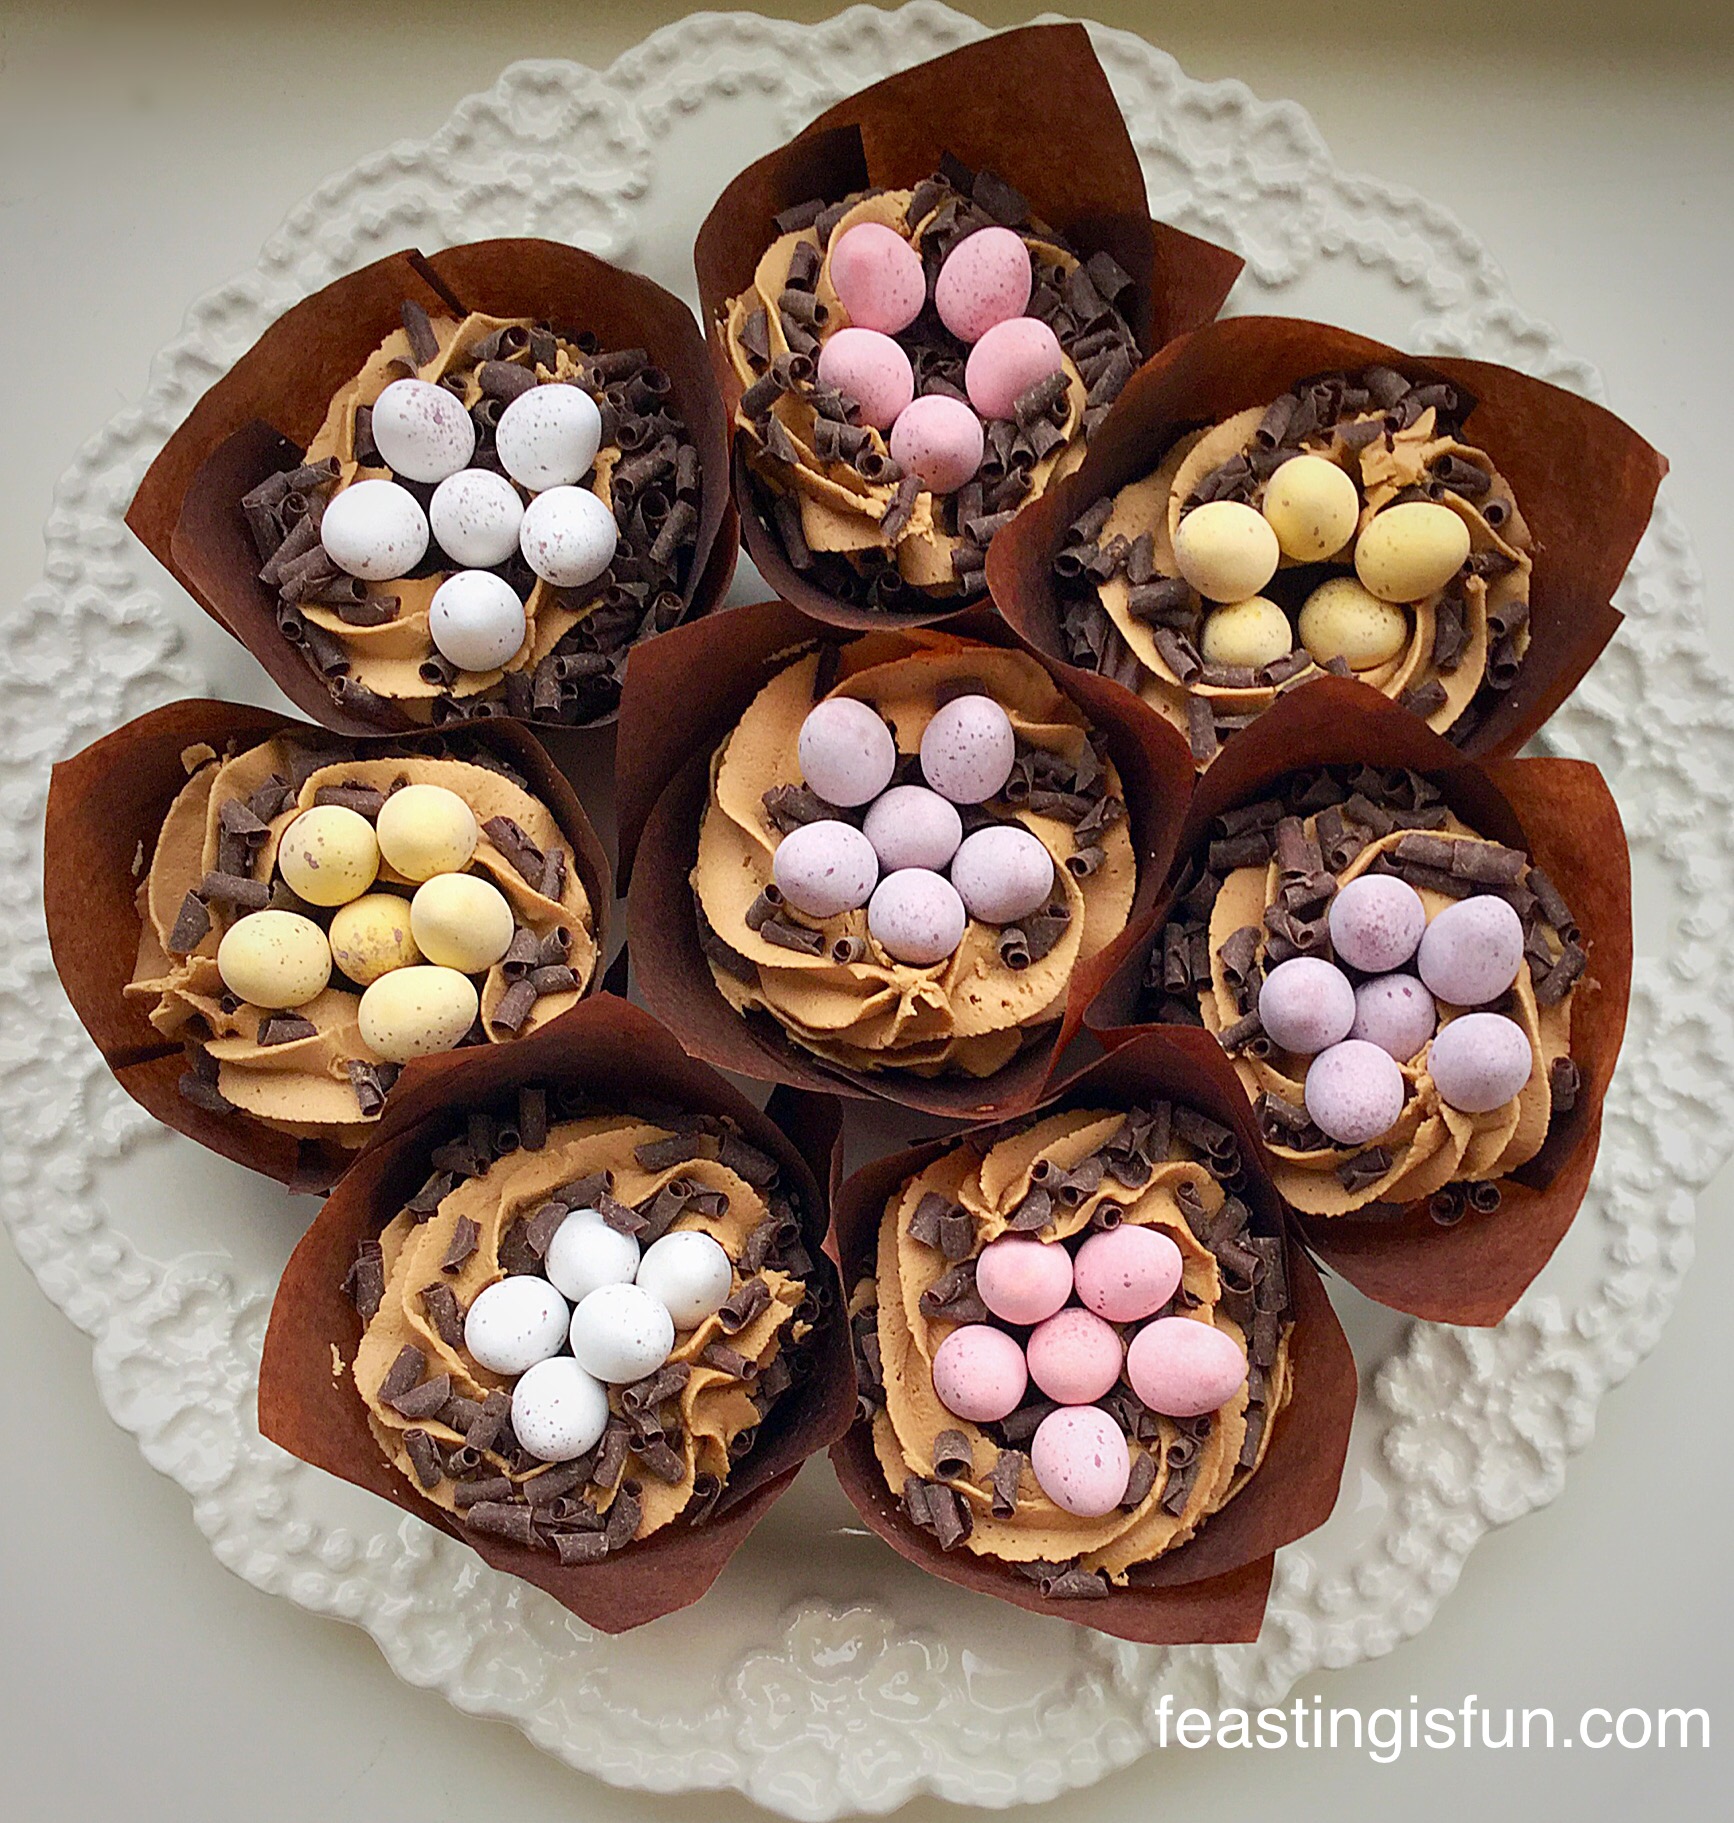 FAB BNIP 6 X MINI EGG NESTS  FOR EASTER CRAFTS CAKES . FREE FAST POST EGGS 